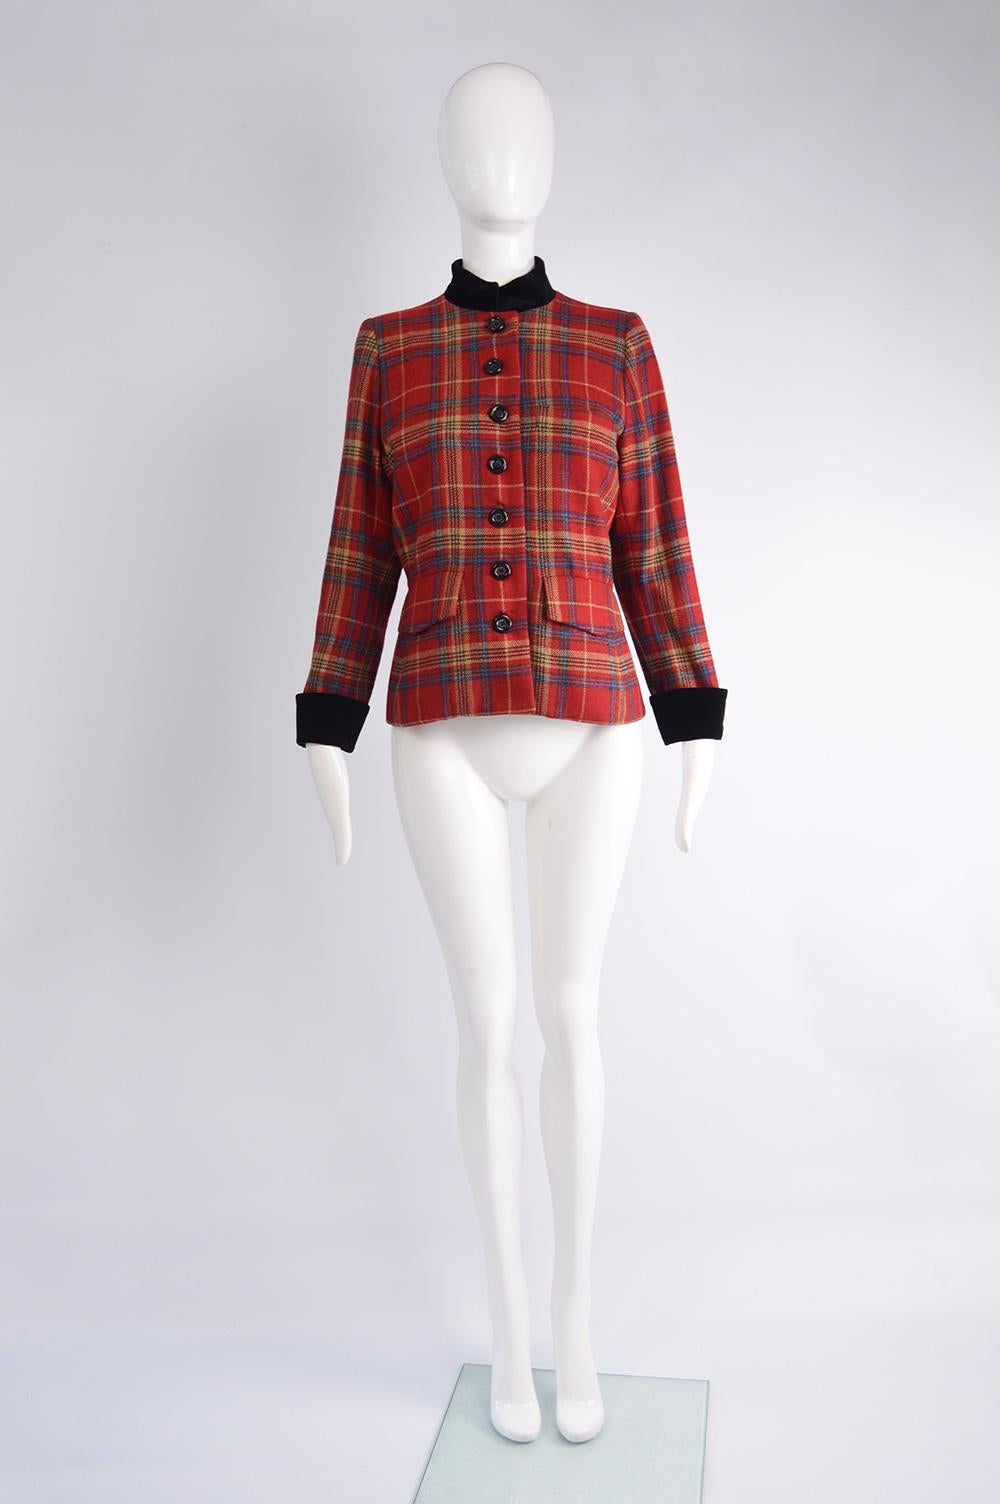 A beautiful vintage Yves Saint Laurent jacket from the 80s in a red plaid checked wool with a black velvet nehru collar and cuffs. 

Size: Marked vintage 36 but this gives an oversized fit but would fit a women's UK 12-14/ US 8-10/ EU 40-42 for a